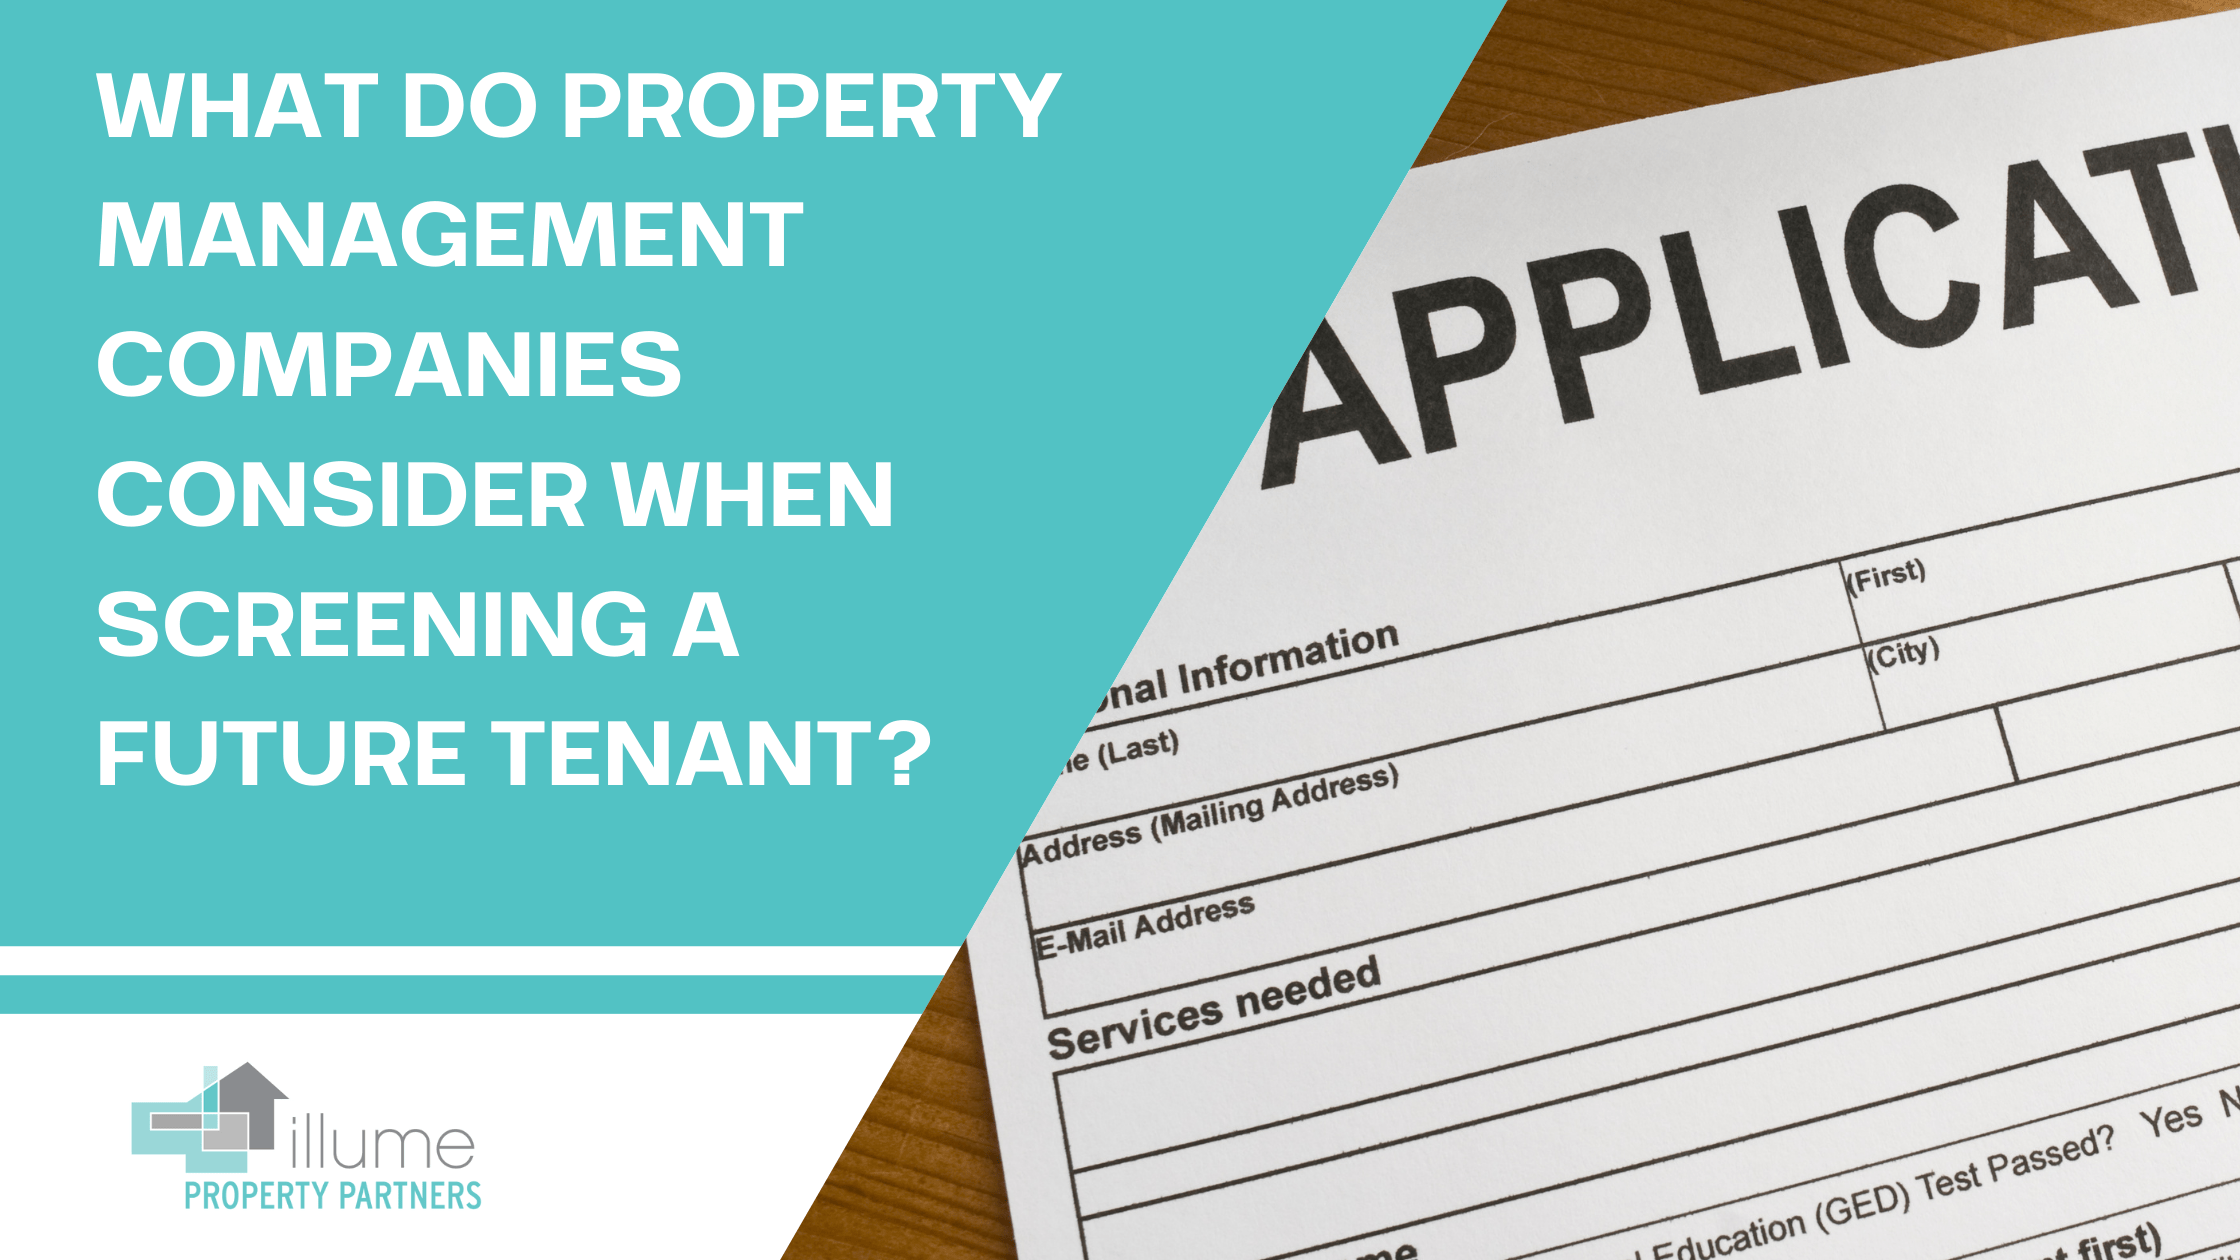 What do Property Management Companies Consider When Screening a Future Tenant?